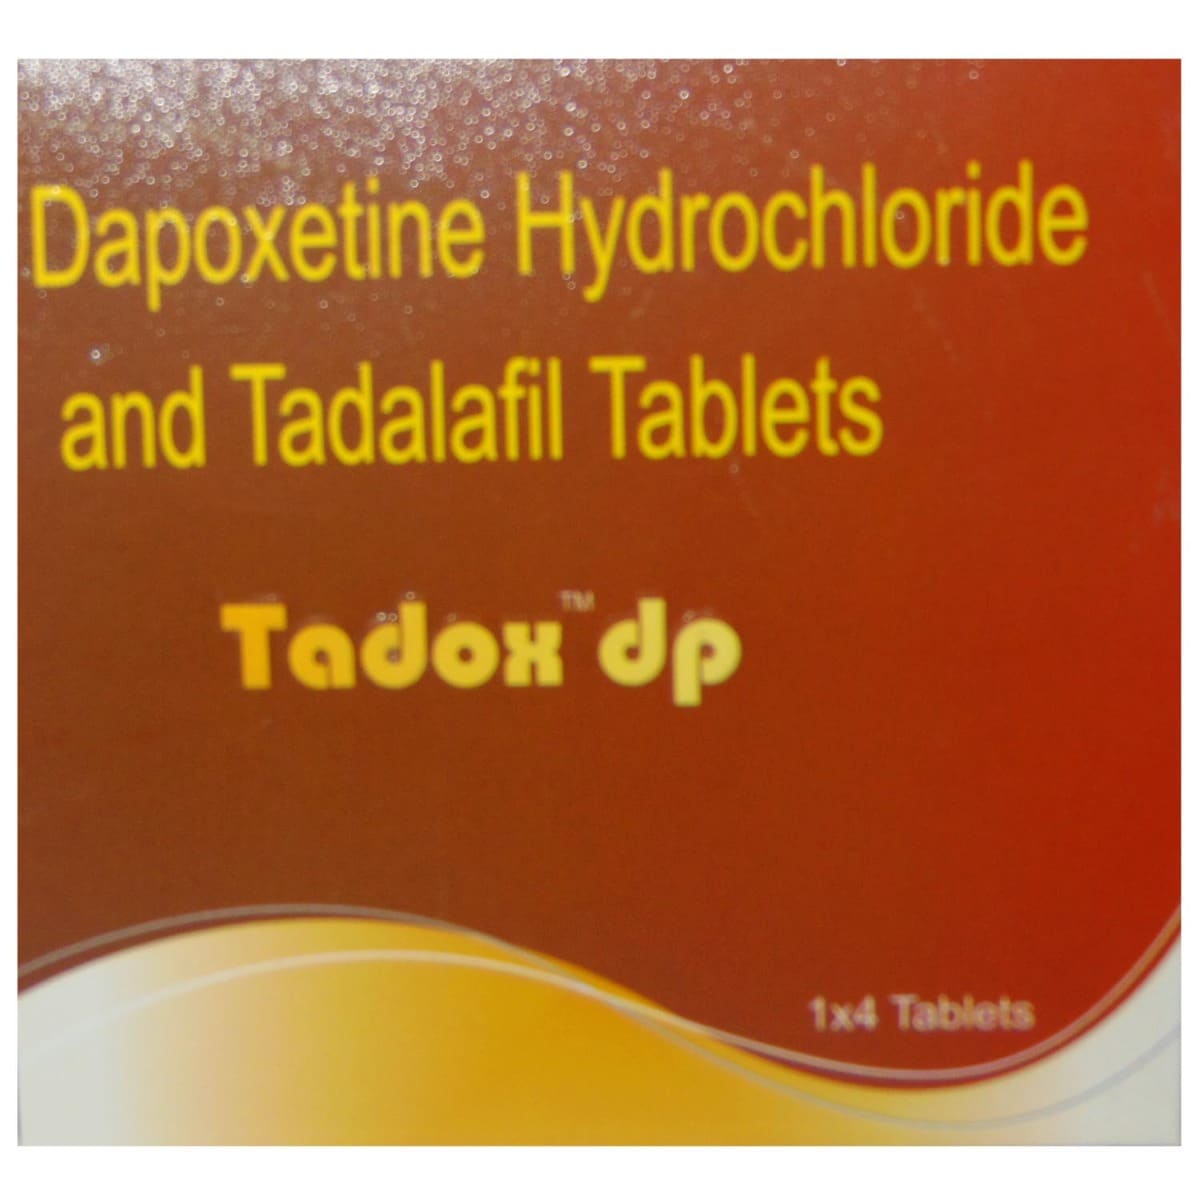 Tadox DP Tablet 4's, Pack of 4 TABLETS